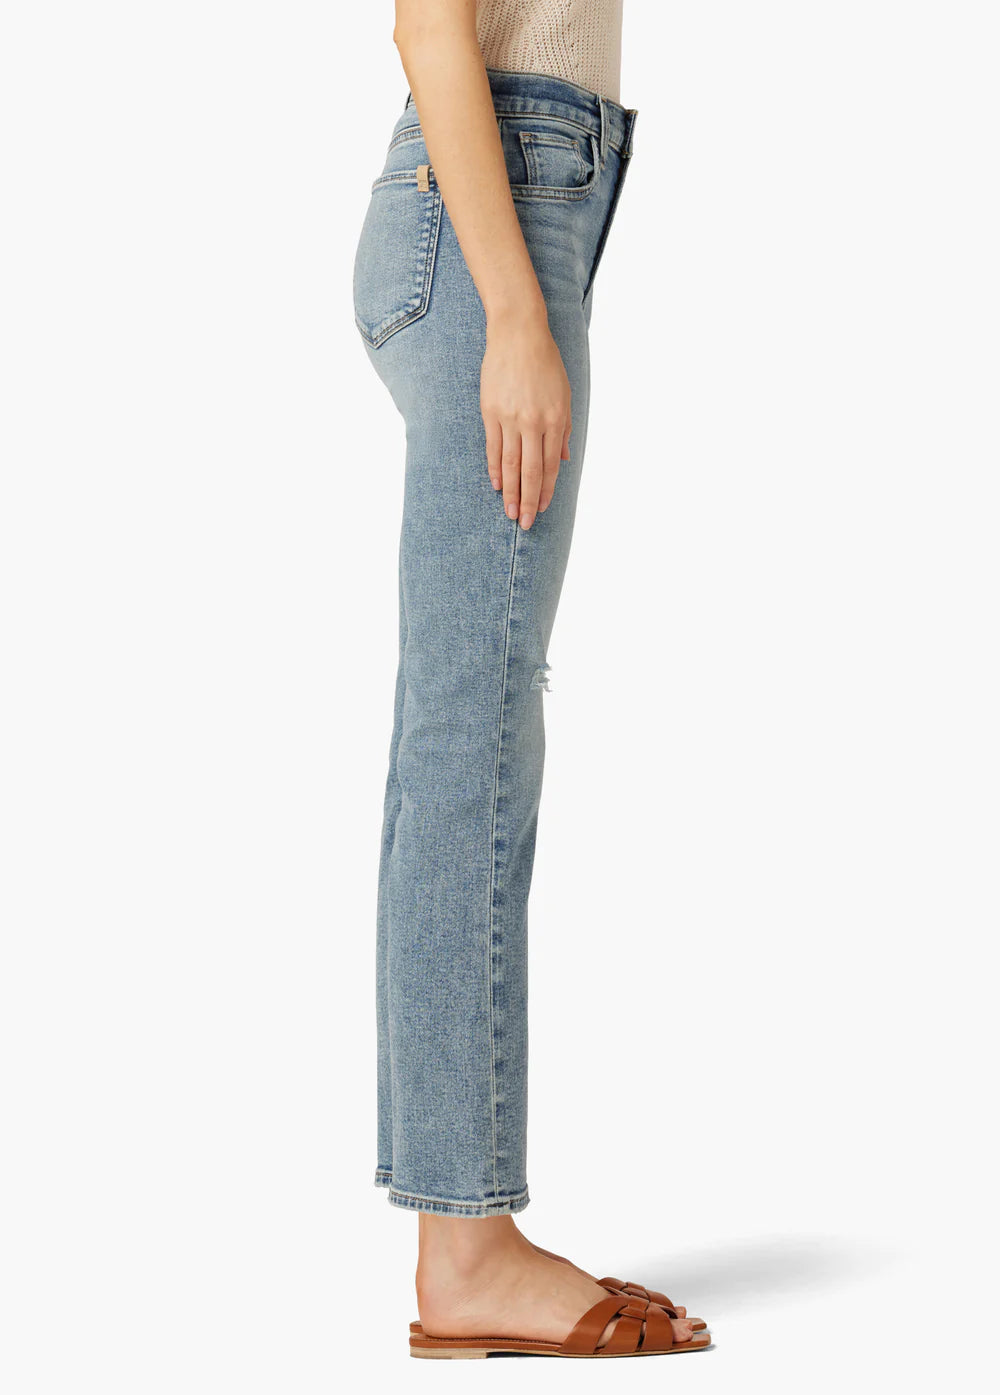 The Callie Cropped Bootcut